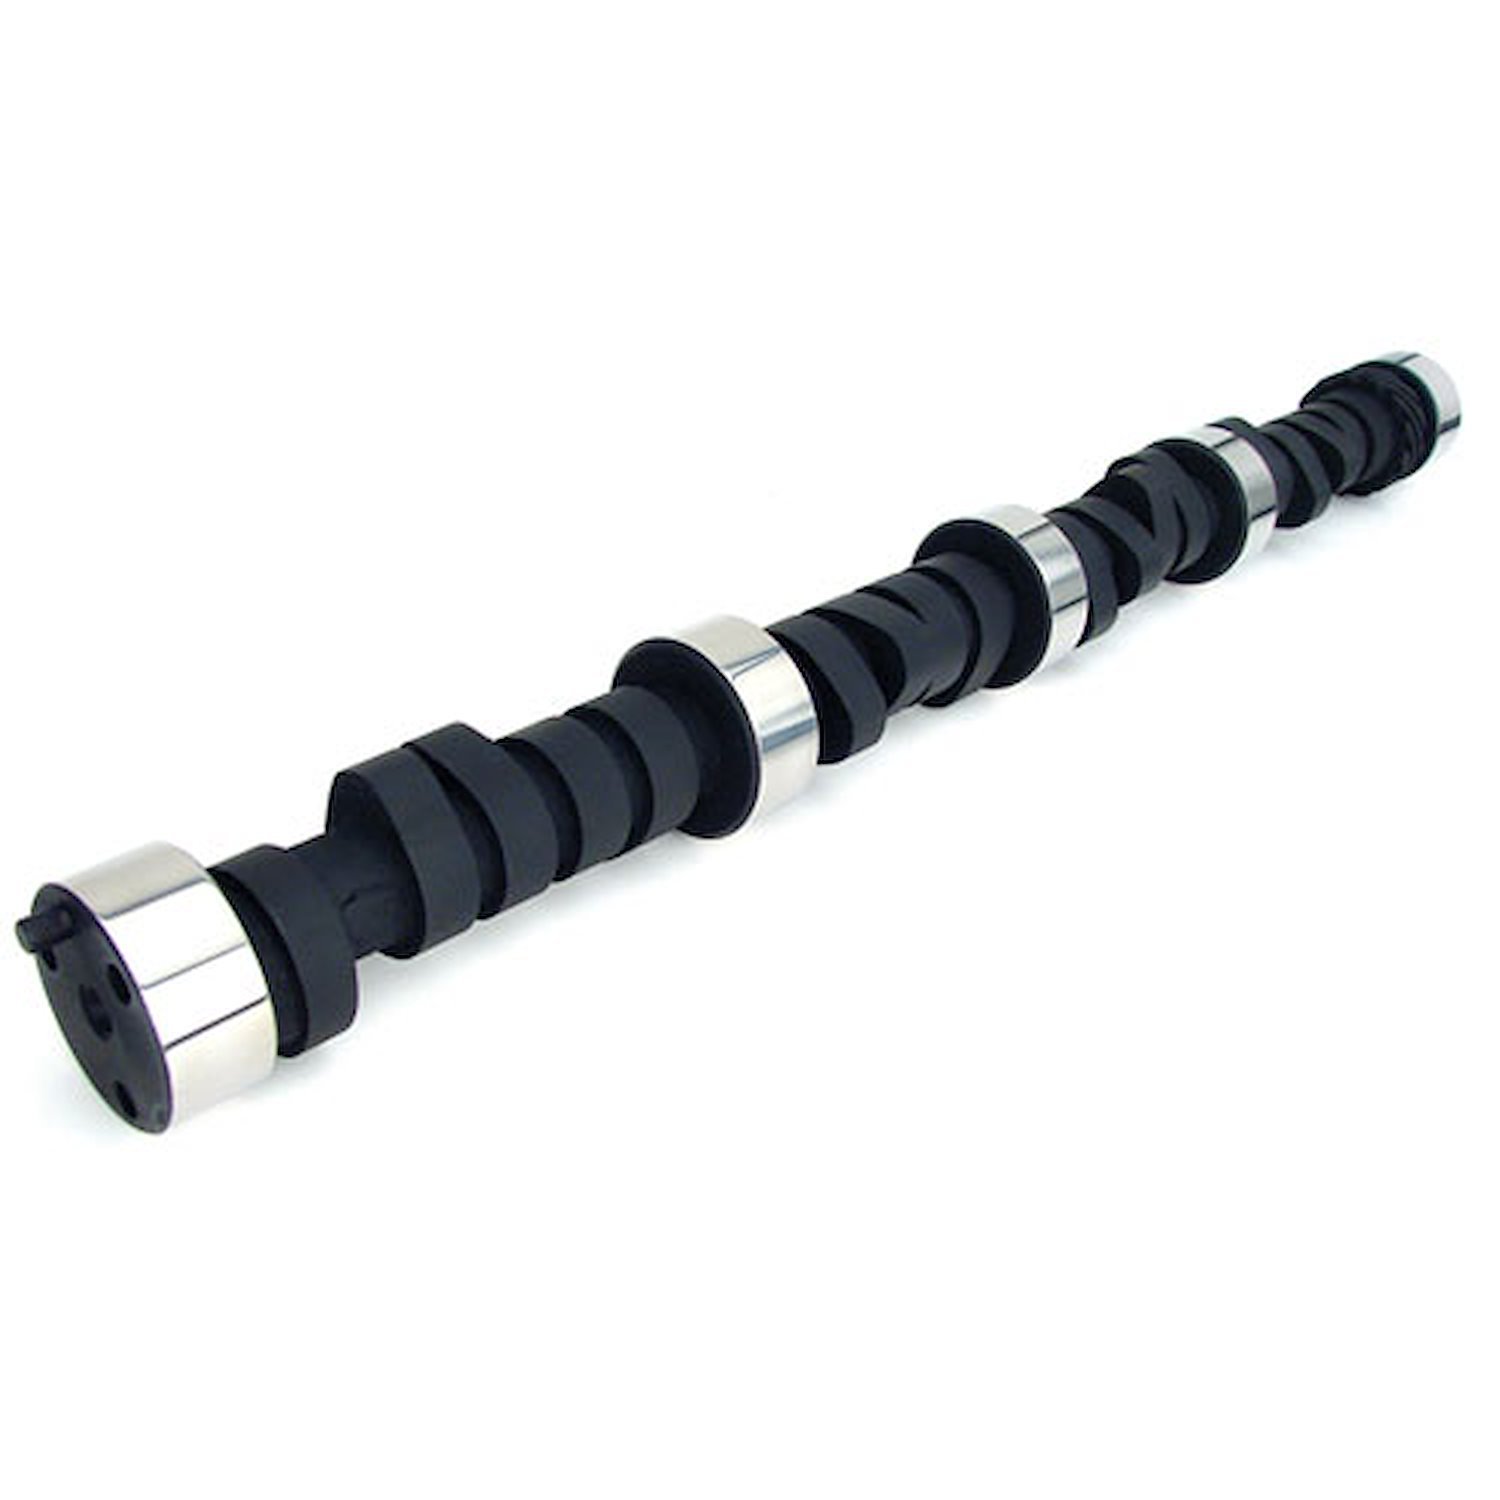 Xtreme Energy 284H Hydraulic Flat Tappet Camshaft Only Lift: .574" /.578" Duration: 284°/296° RPM Range: 2300-6500